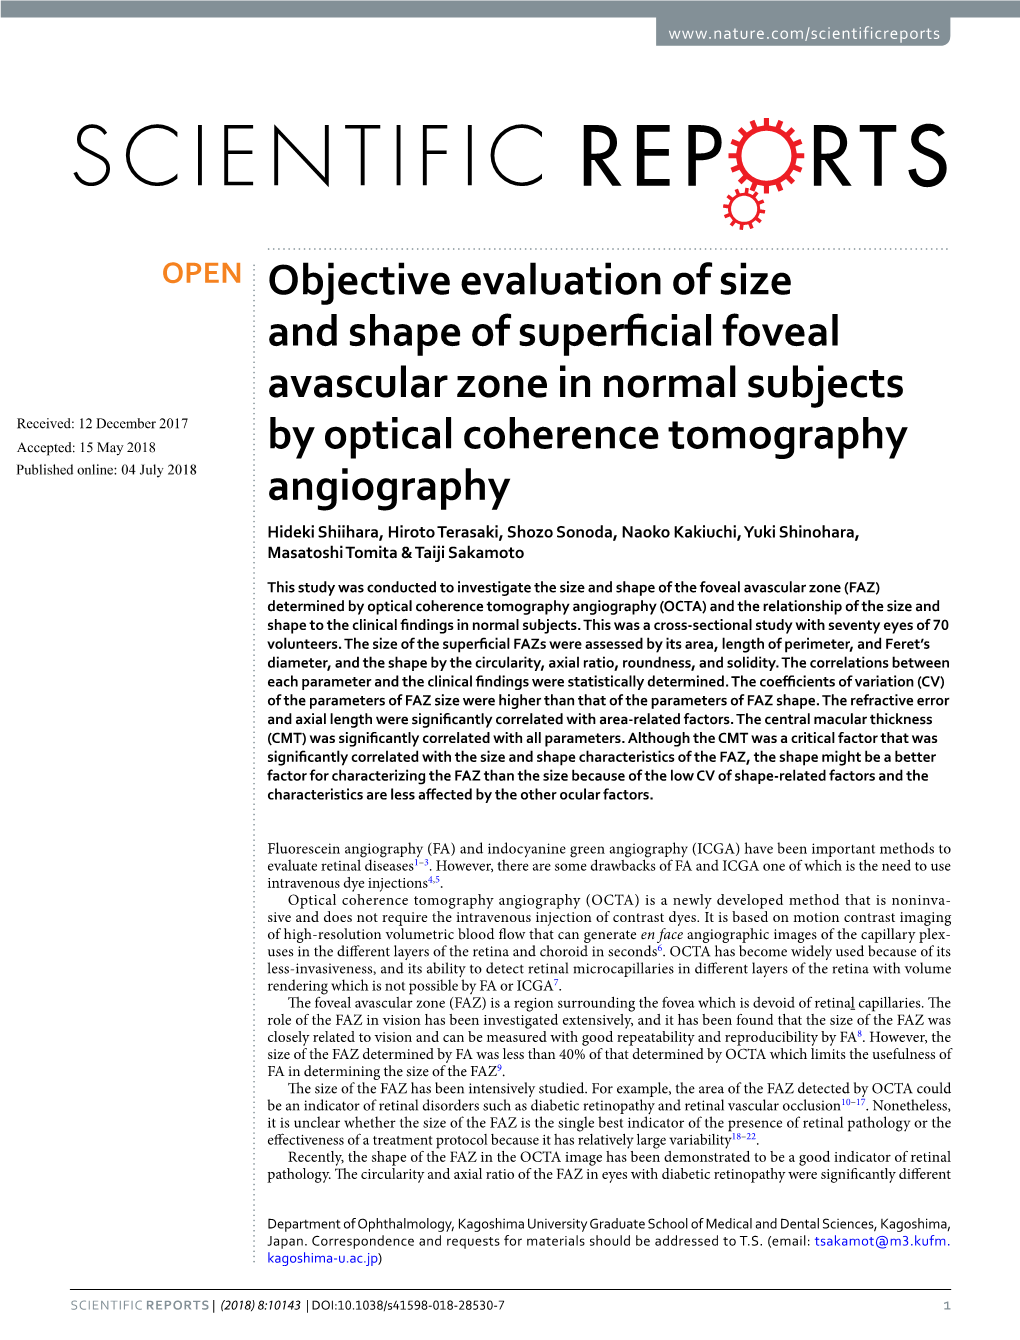 Objective Evaluation of Size and Shape of Superficial Foveal